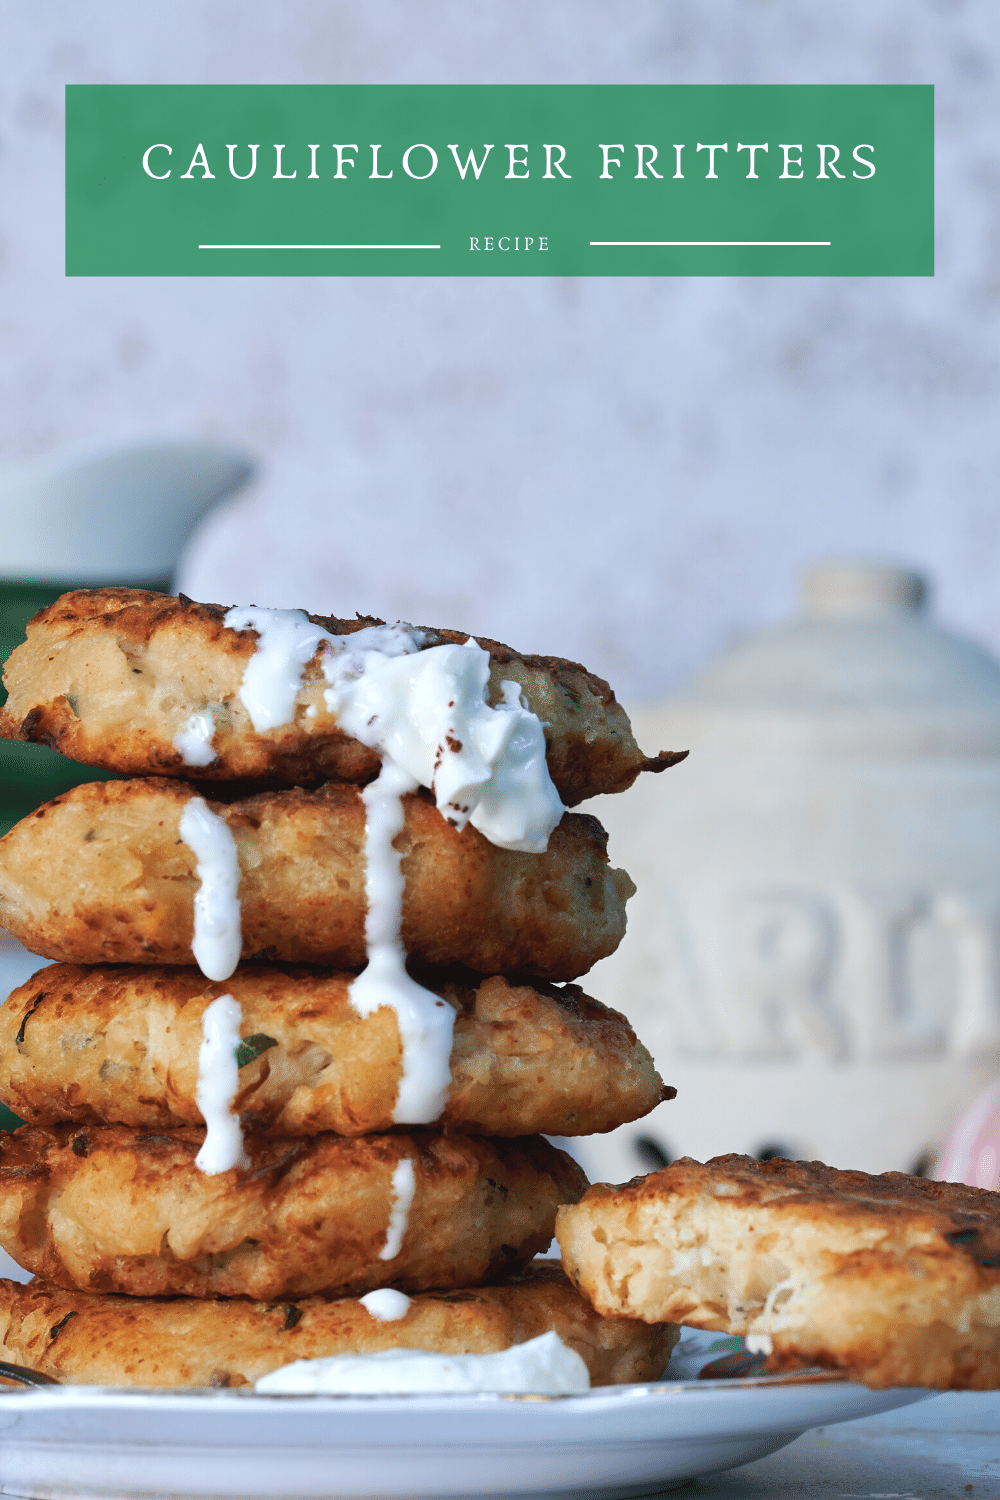 Pinable image for Turkish Cauliflower Fritters. The picture shows a stack of cauliflower fritters, a garlic store and the top of a jug. The Turkish fritters are topped with a dollop of garlic yoghurt. Karnabahar Mücver  - Turkish cauliflower fritters. Exploring The Turkish Kitchen'. 